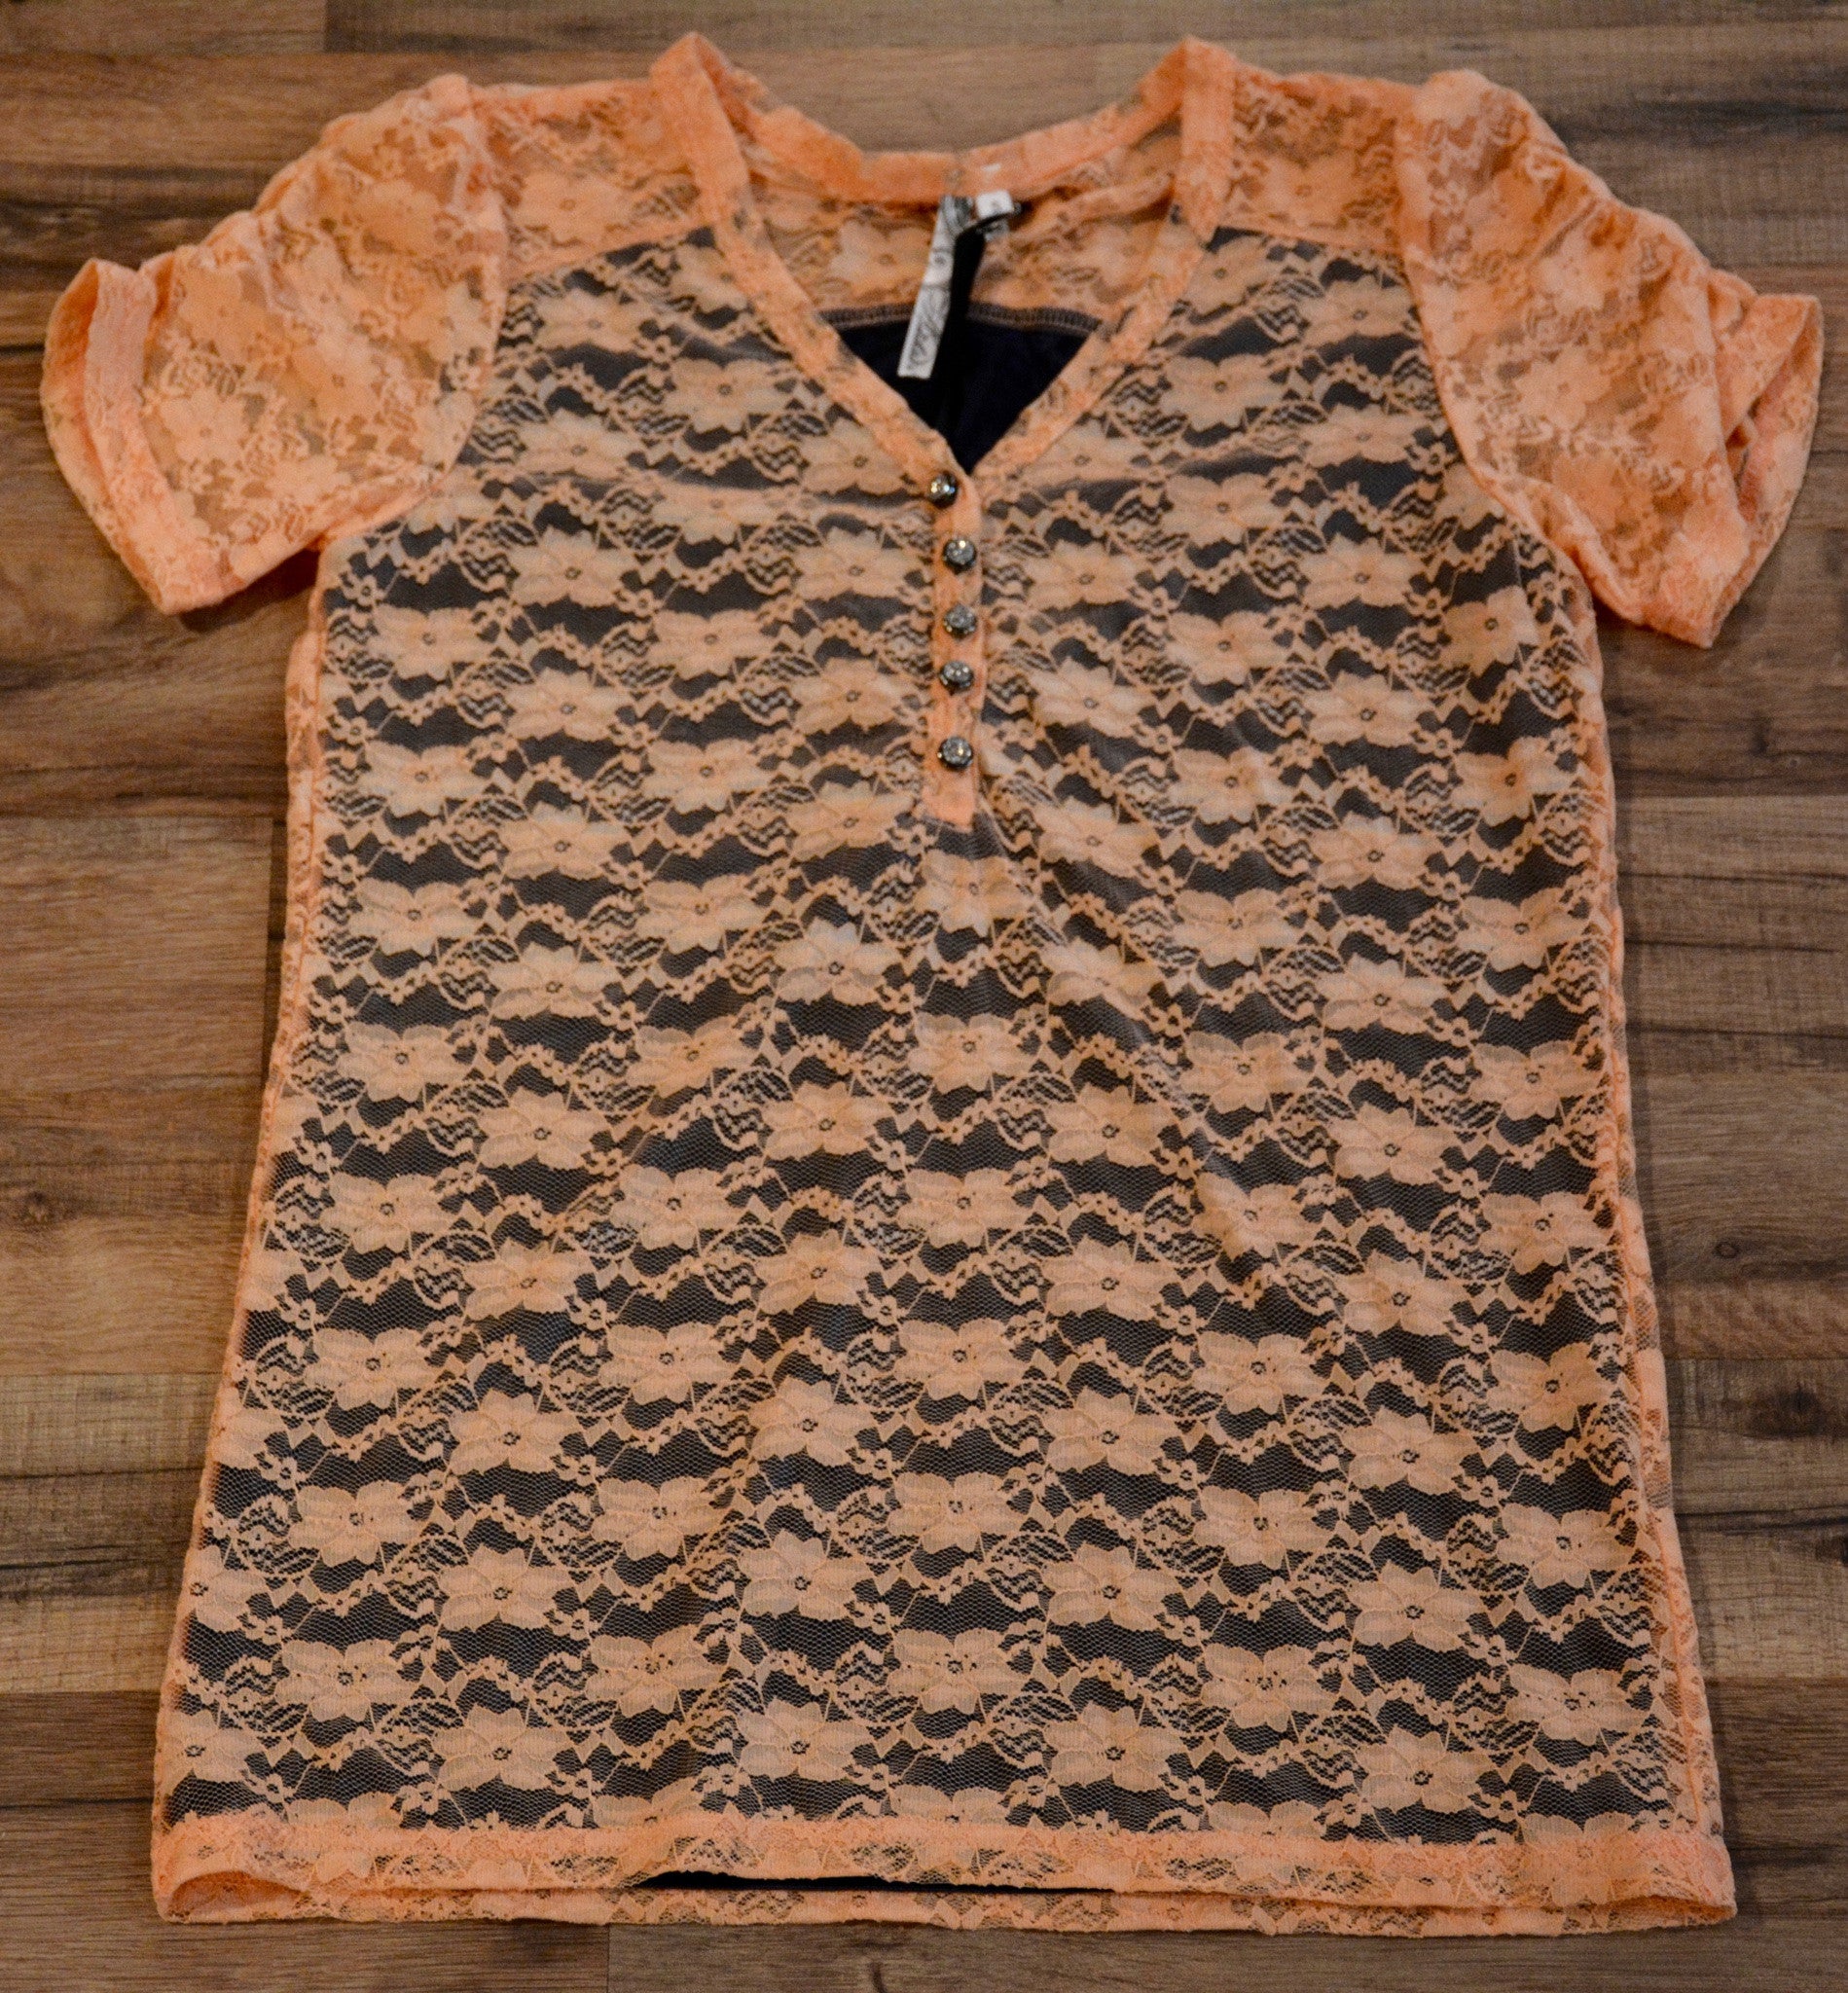 Adiktd Lace Tee with Contrast Lining Details - Pistol Annie's Boutique